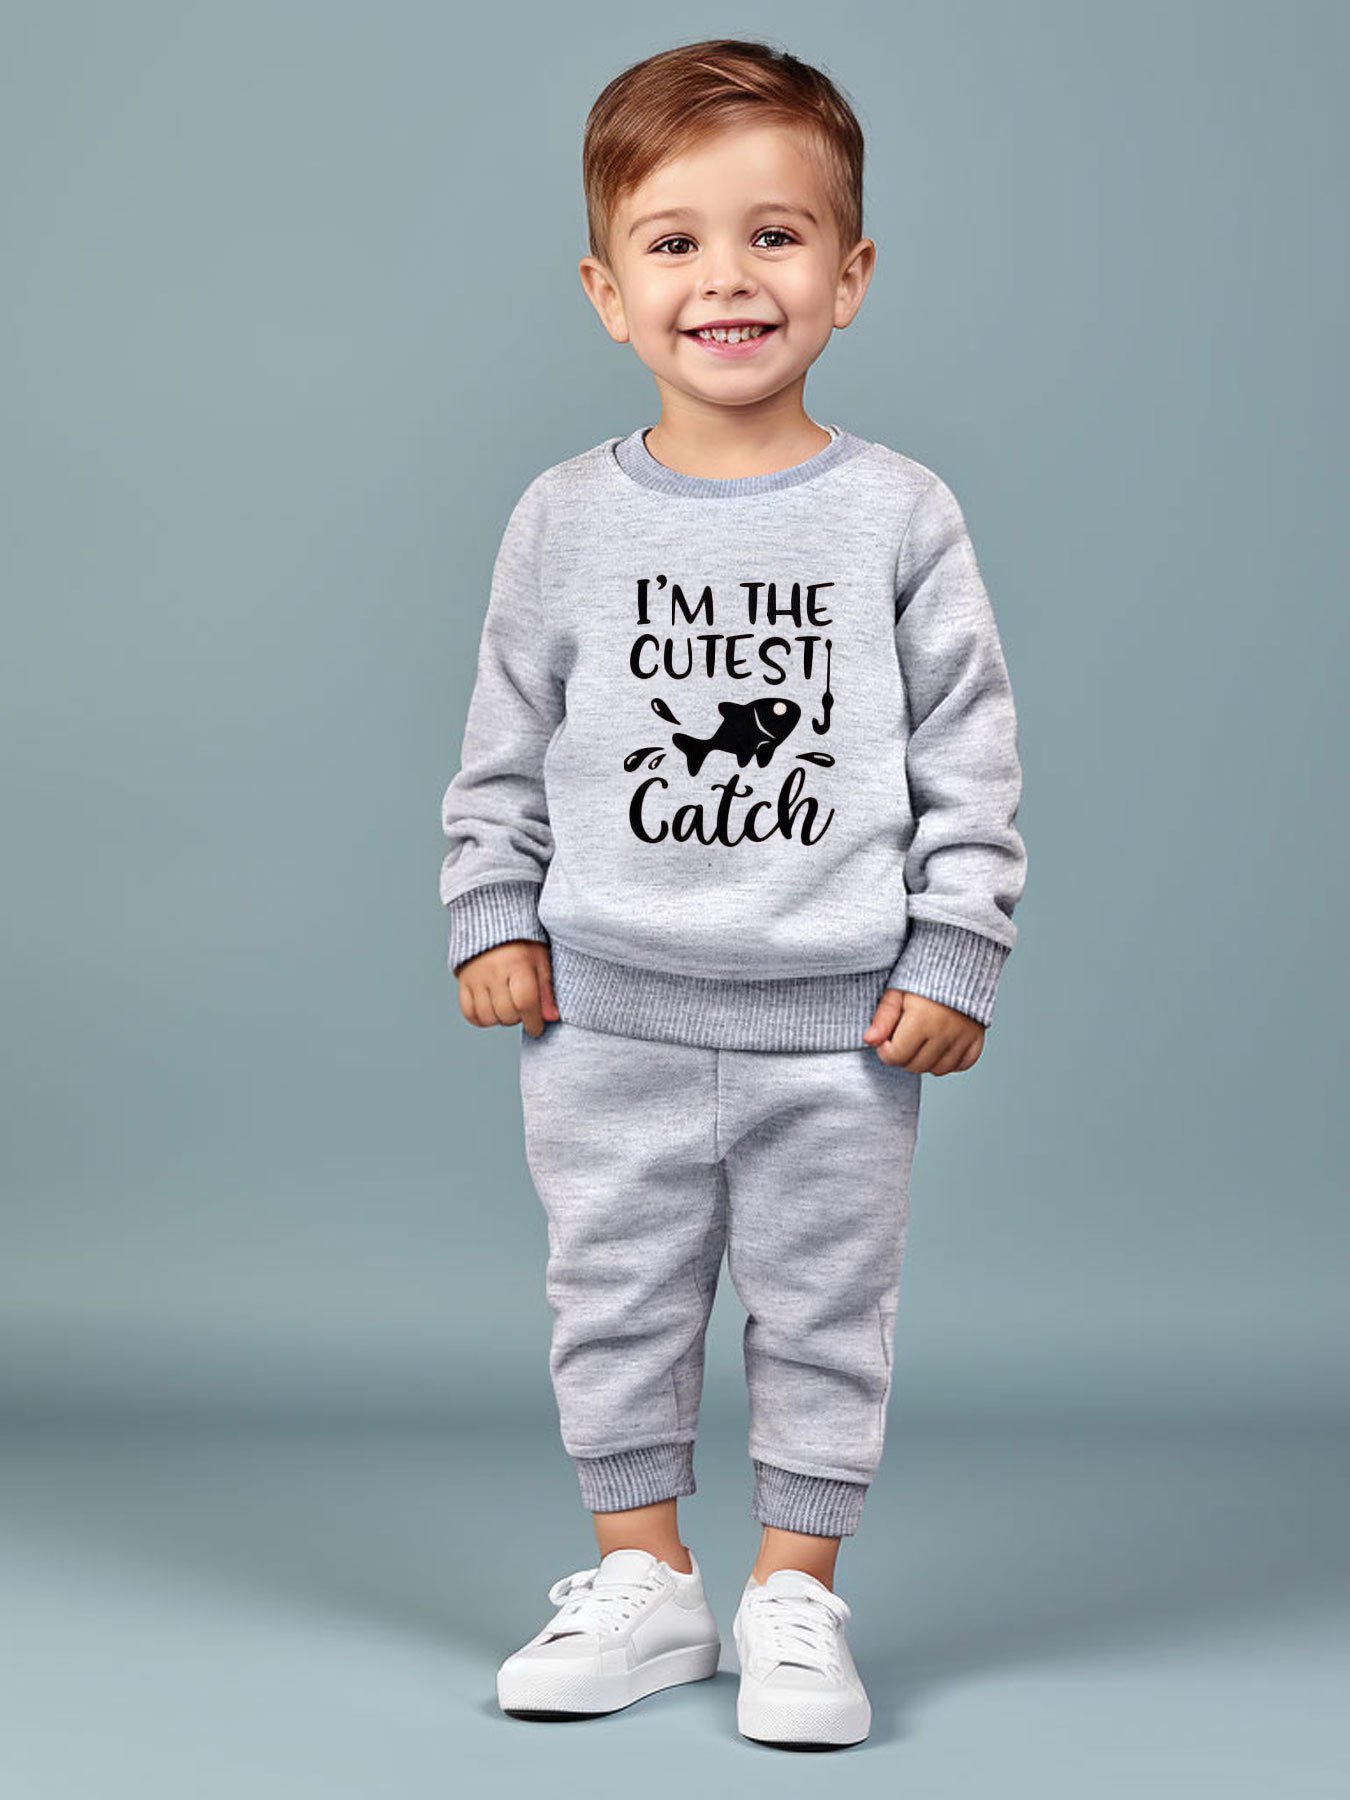 2pcs I'm The Cutest Catch Print Crew Neck Outfit For Boys, Fish Pattern  Sweatshirt & Comfy Pants Set, Kid's Clothes For Fall Winter, As Gift